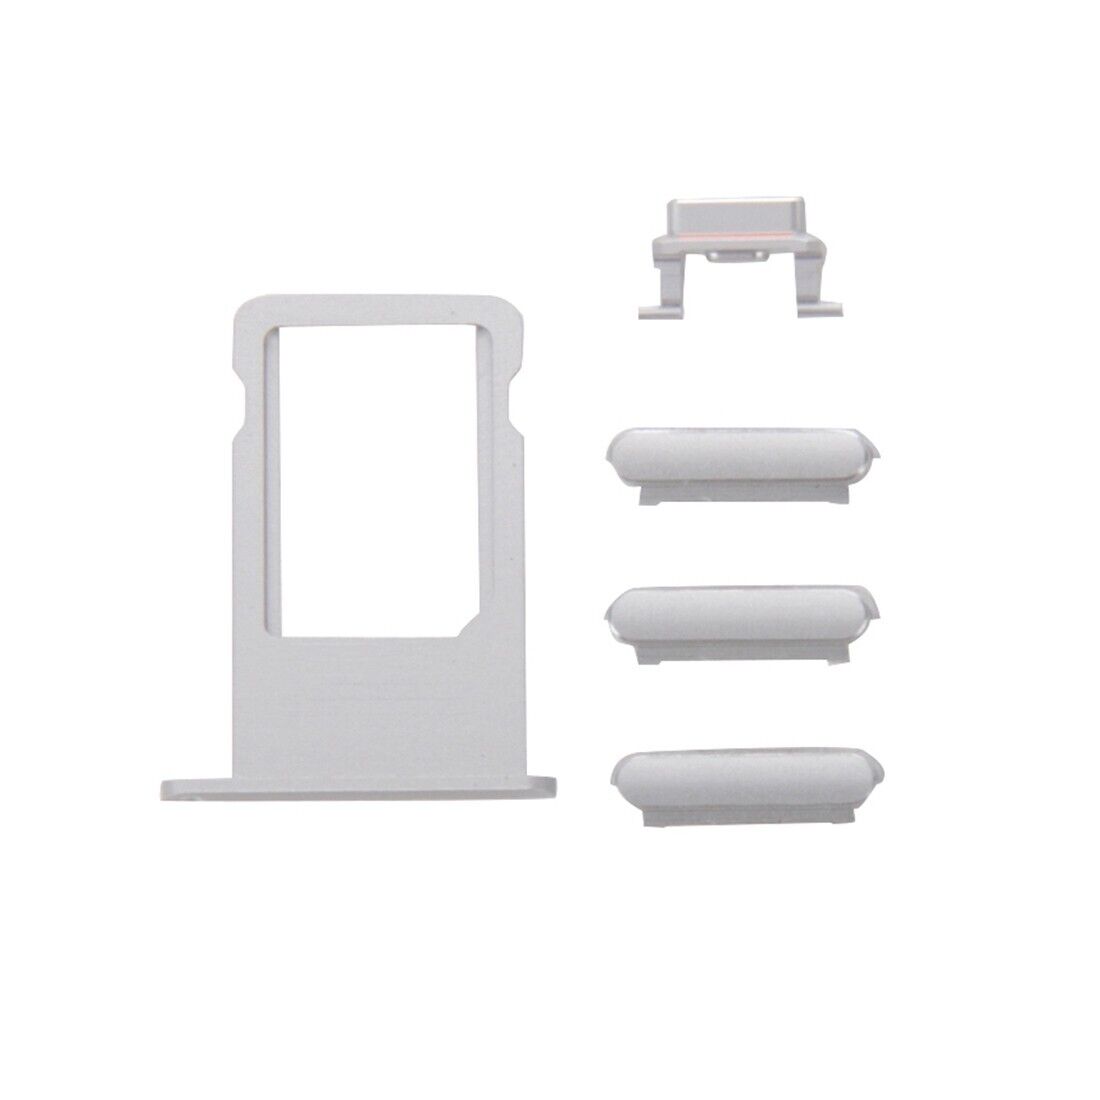 Card Tray Upper Key for iPhone 6s (Silver)